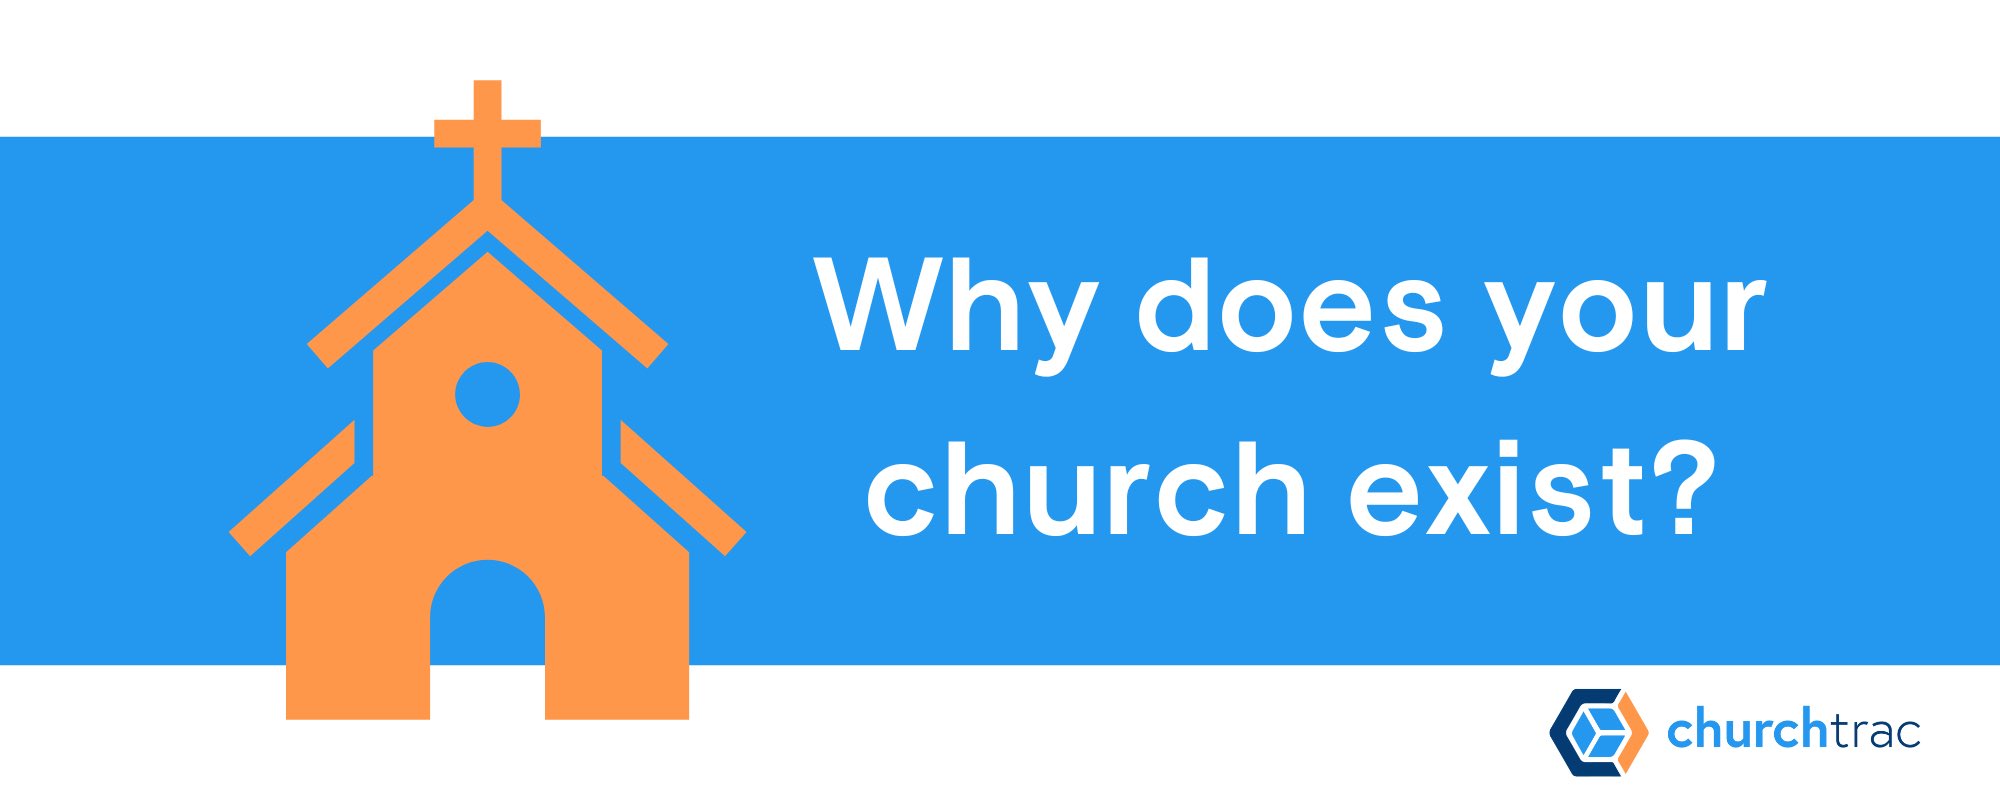 Church revitalization requires church leaders to ask tough questions about their church